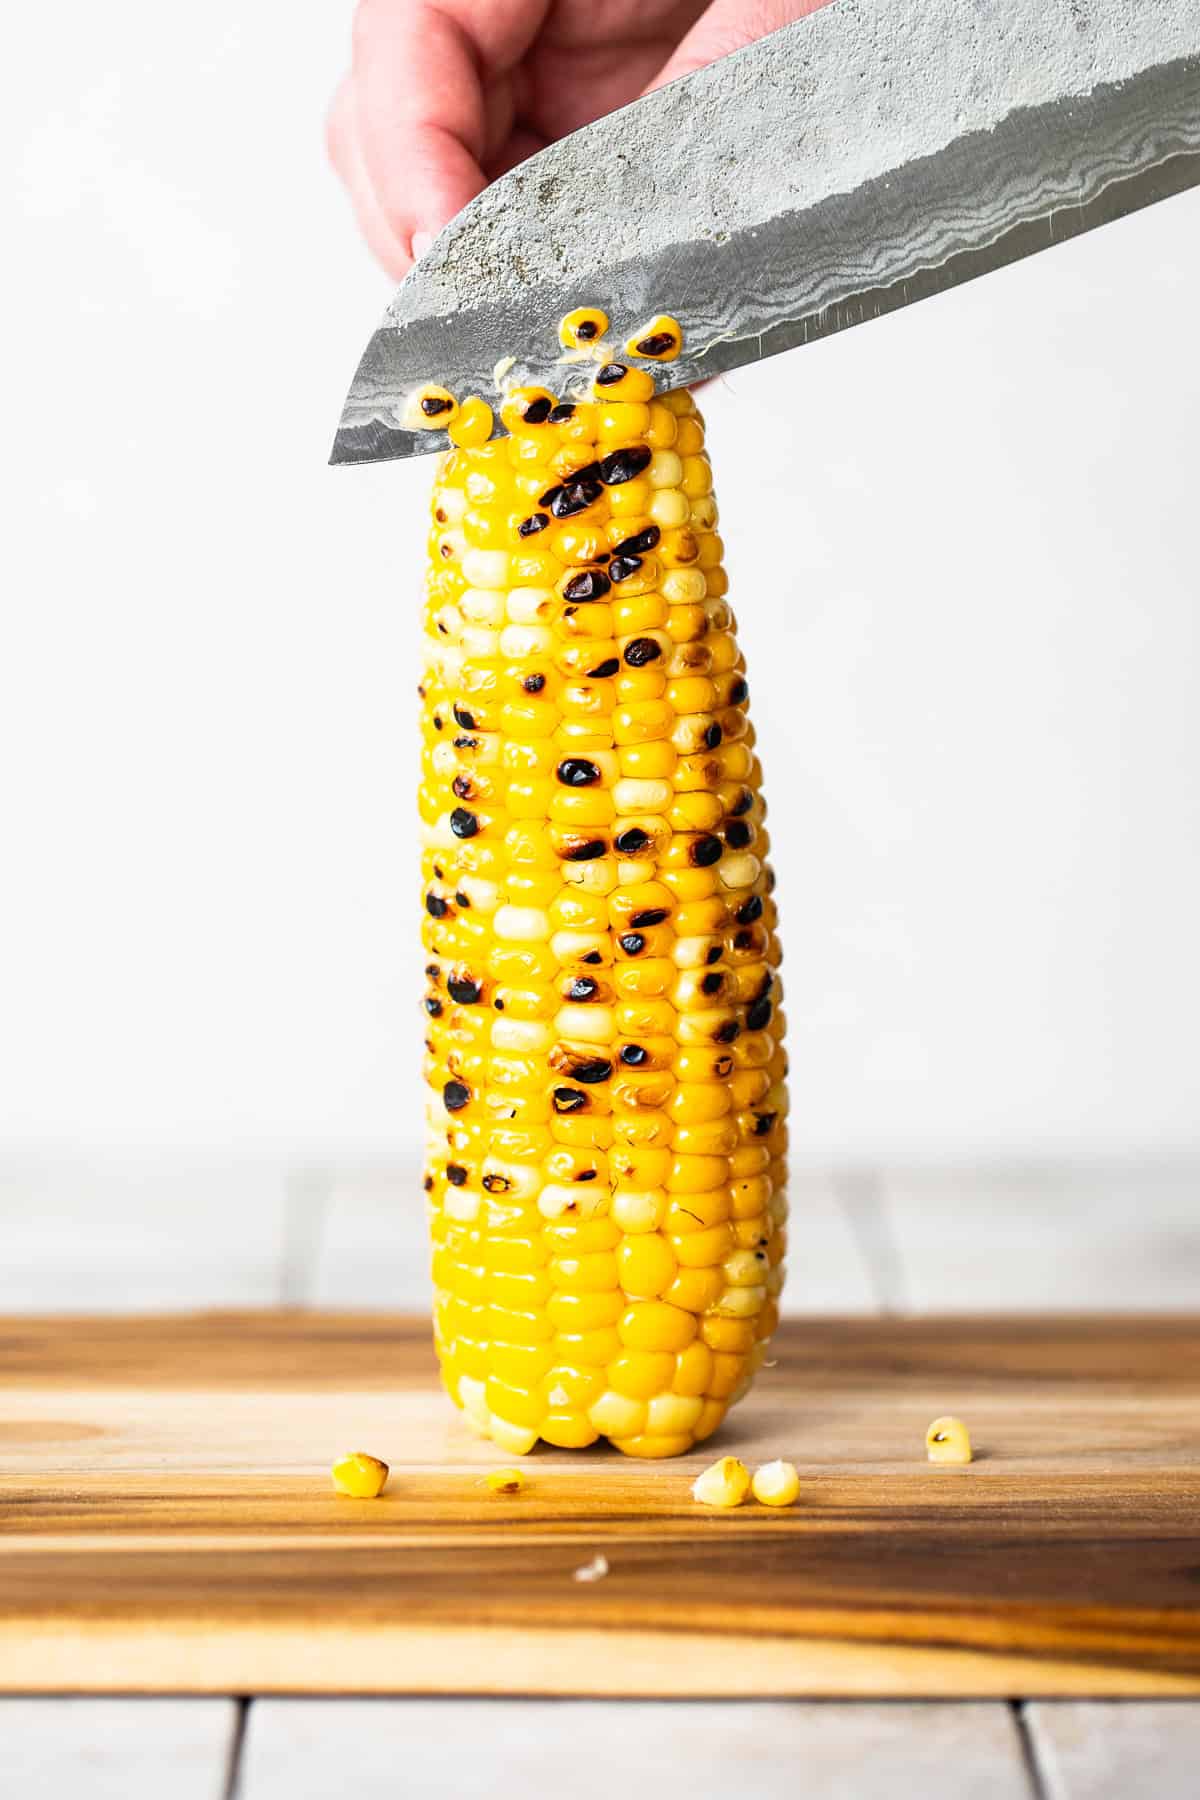 Grilled corn being sliced off the cob.